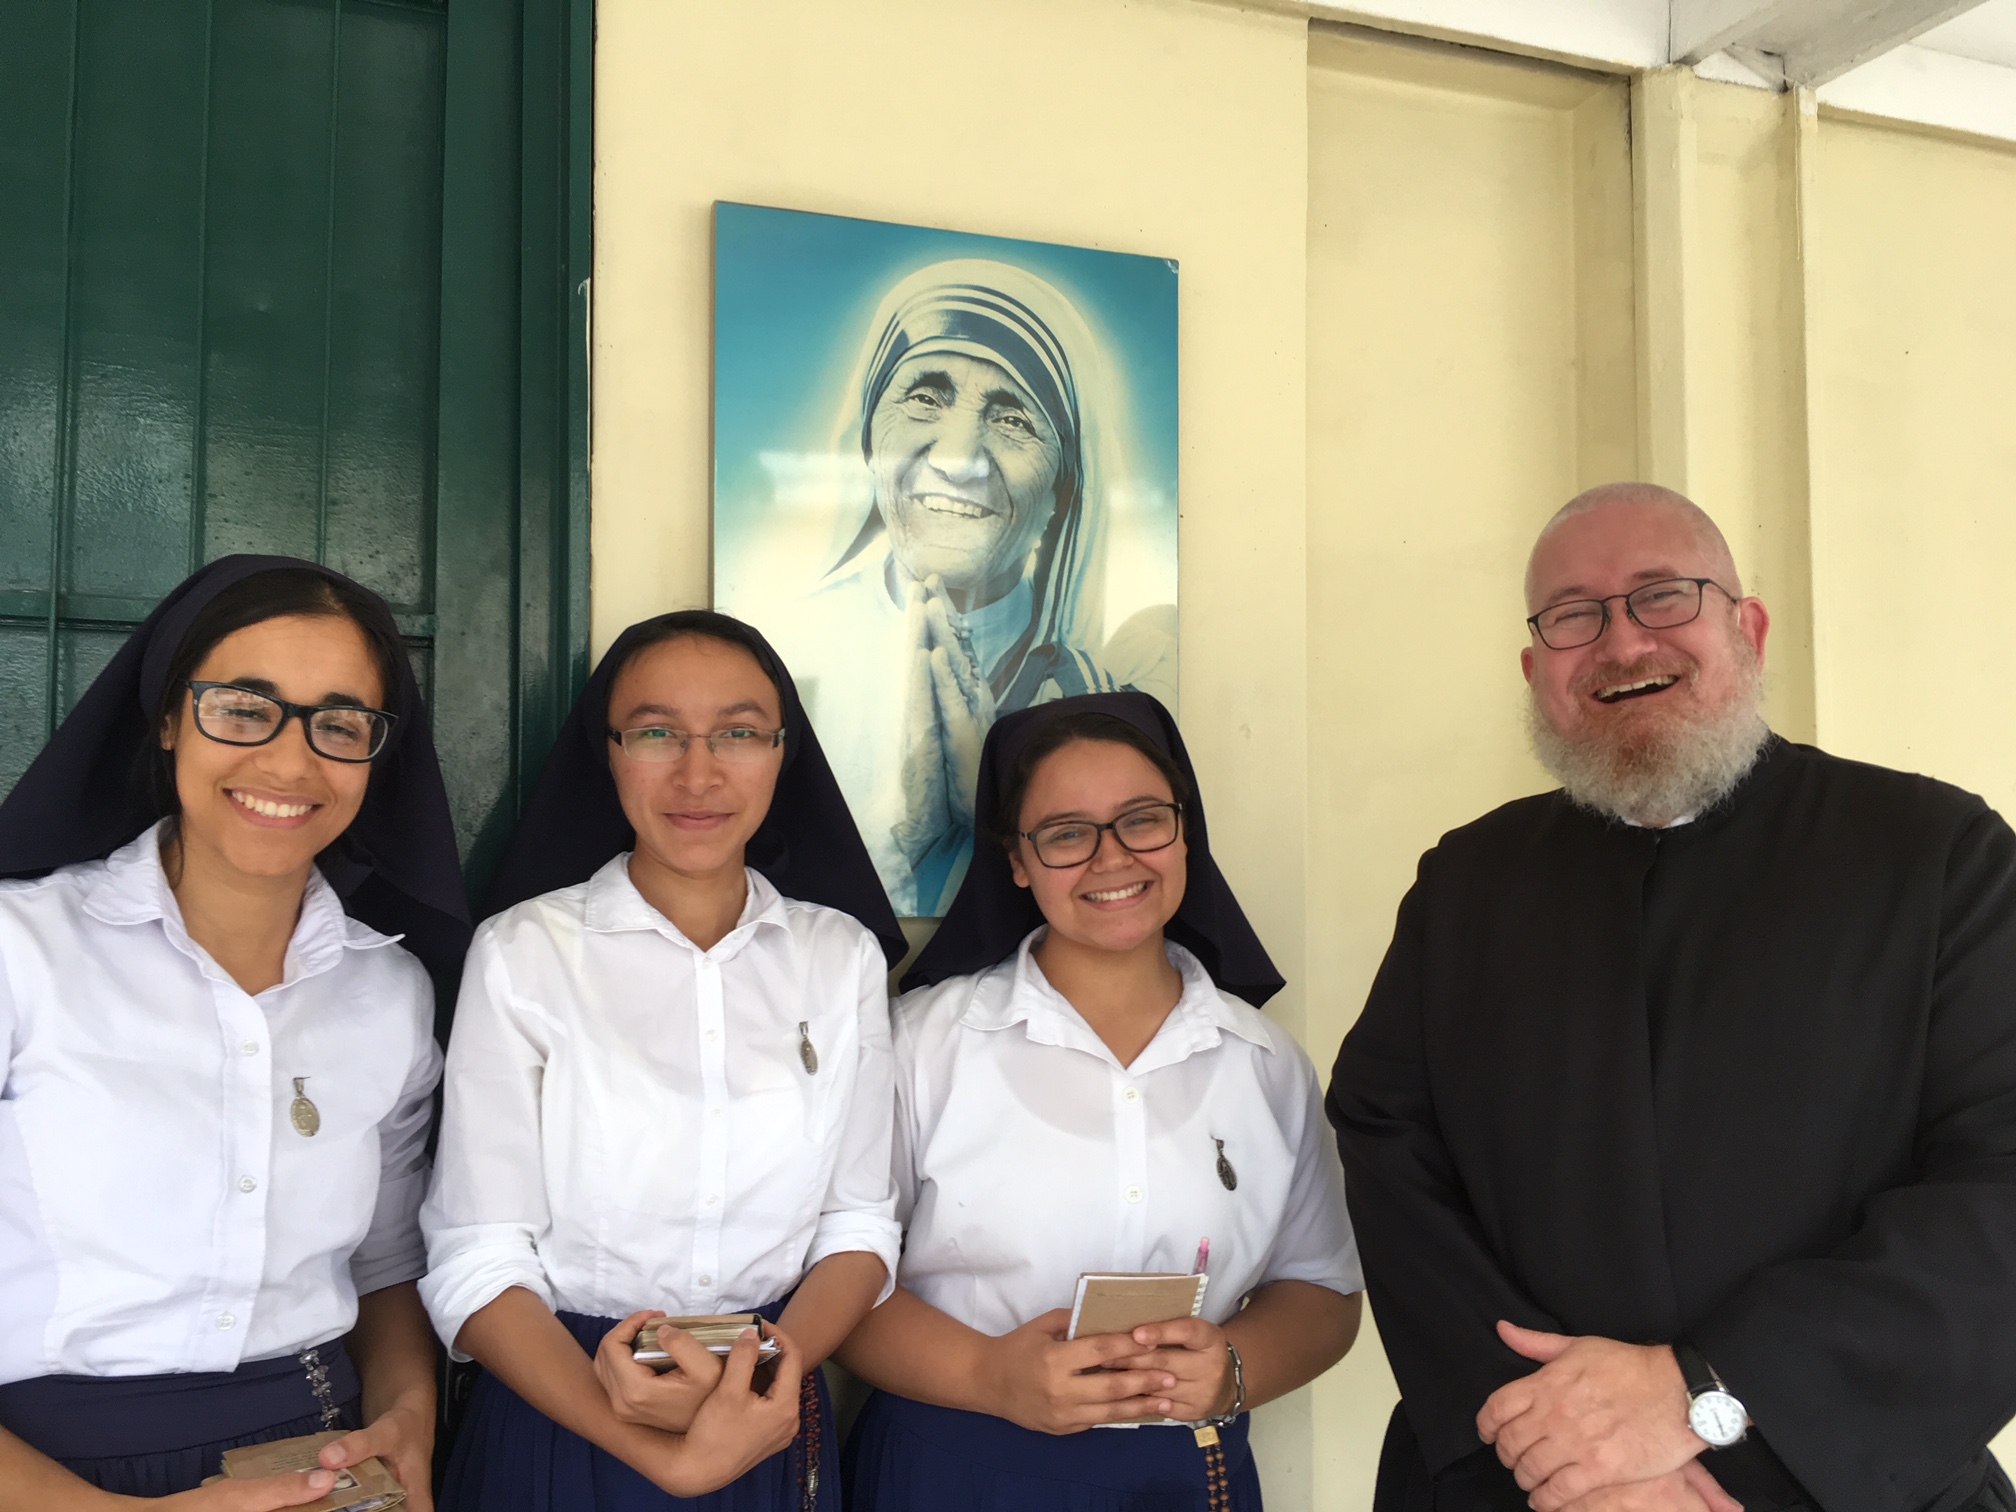 News from Father Blazek: Pilgrimage to Aparecida and retreat for Missionaries of Charity